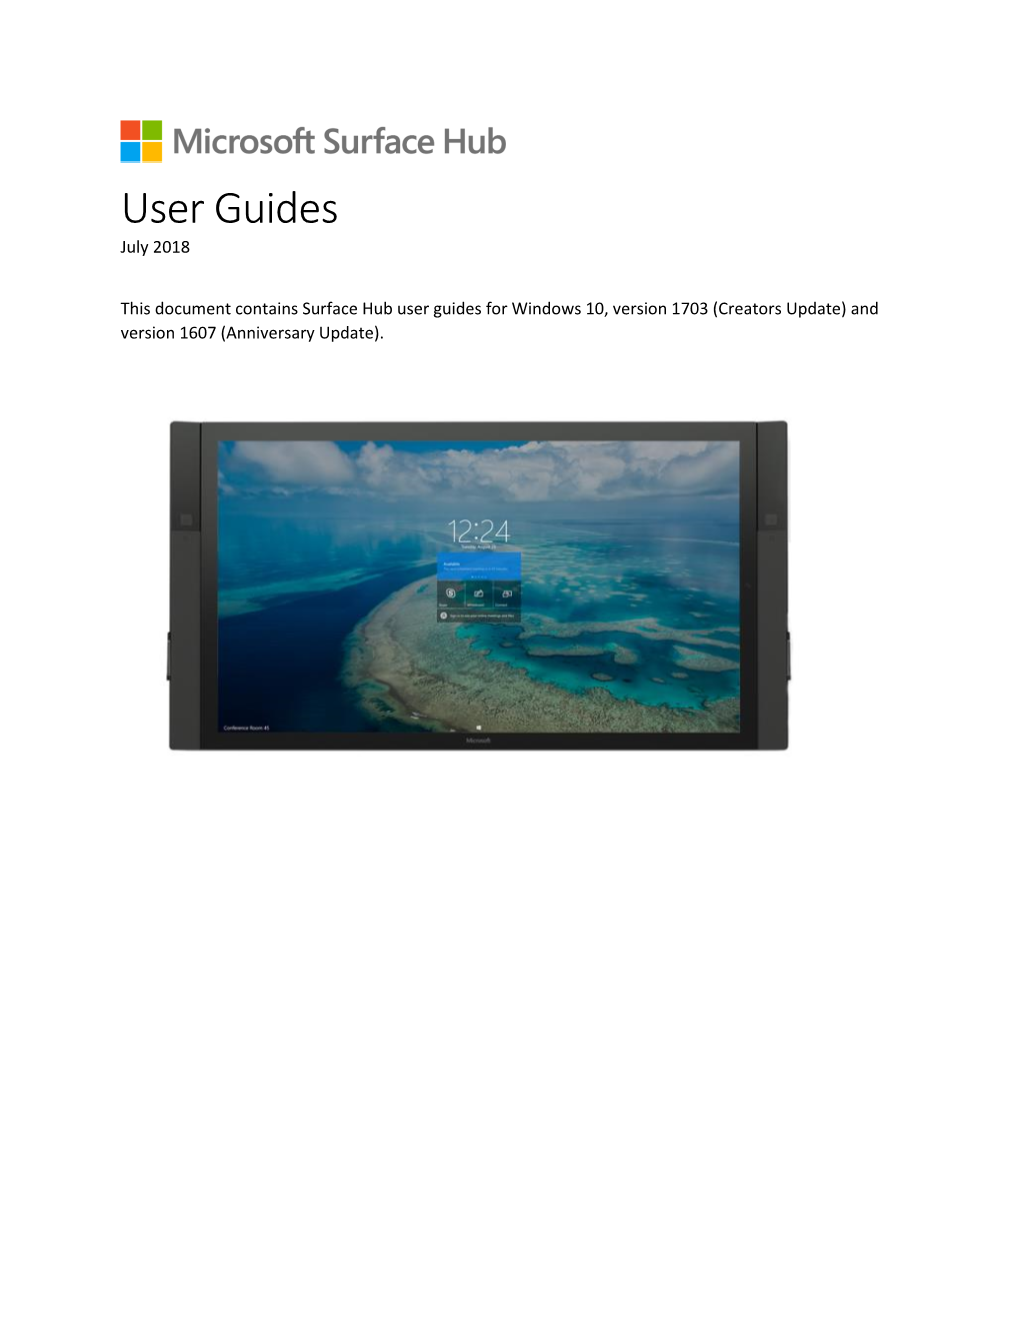 Surface Hub User Guides for Windows 10, Version 1703 (Creators Update) and Version 1607 (Anniversary Update)